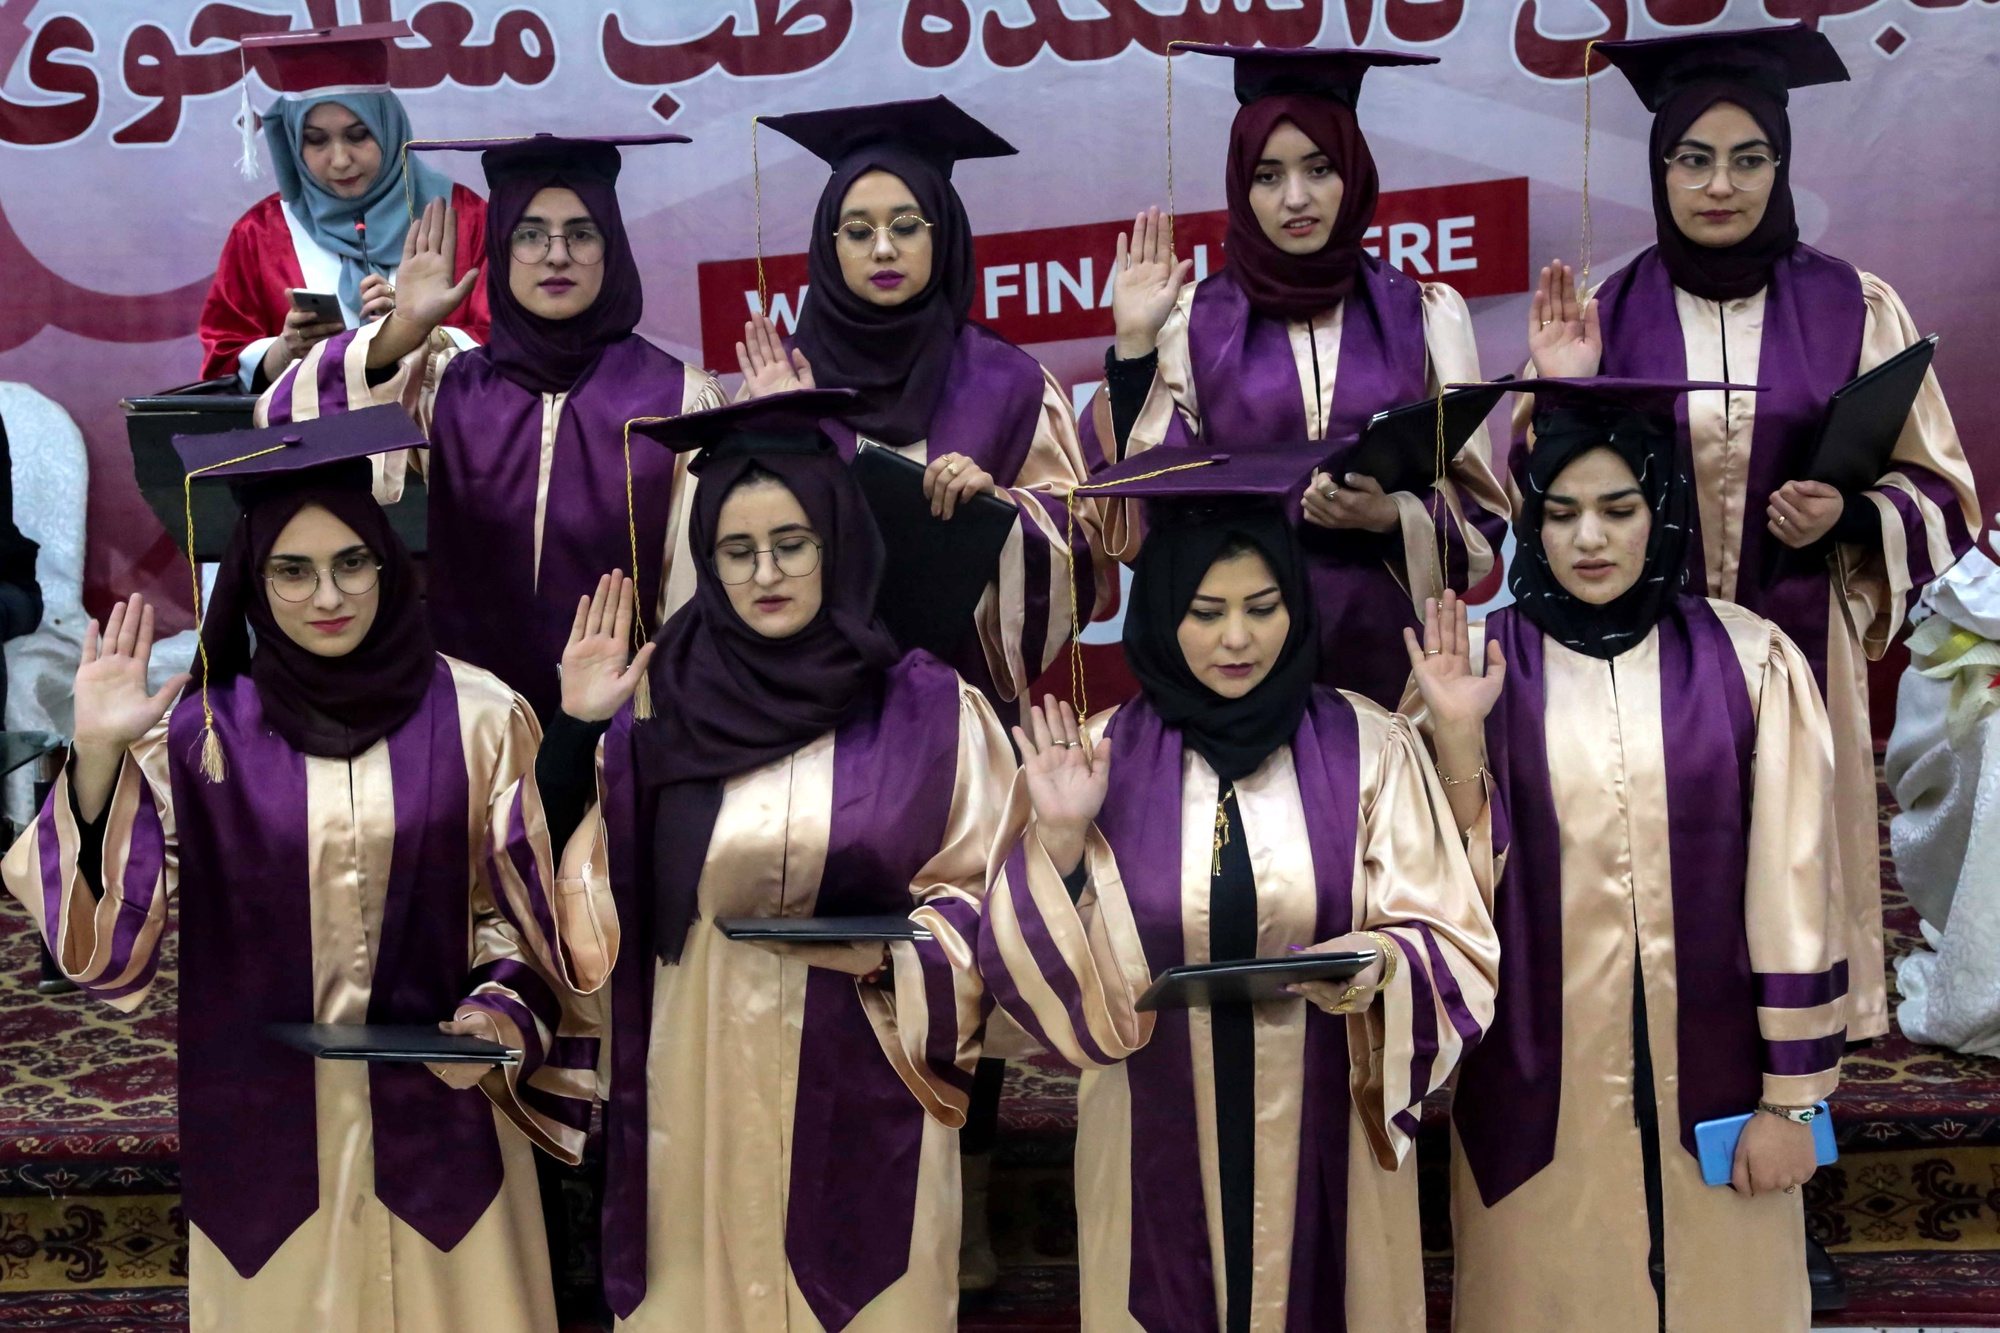 epa10388803 Afghan girls from a private university celebrate their graduation in Kabul, Afghanistan, 04 January 2023. A group of 24 male and nine female students at a private university were graduated from the Faculty of Medicine on 04 January. The ruling Taliban has banned women from attending university in Afghanistan, according to an order issued on 20 December 2022.  EPA/STRINGER